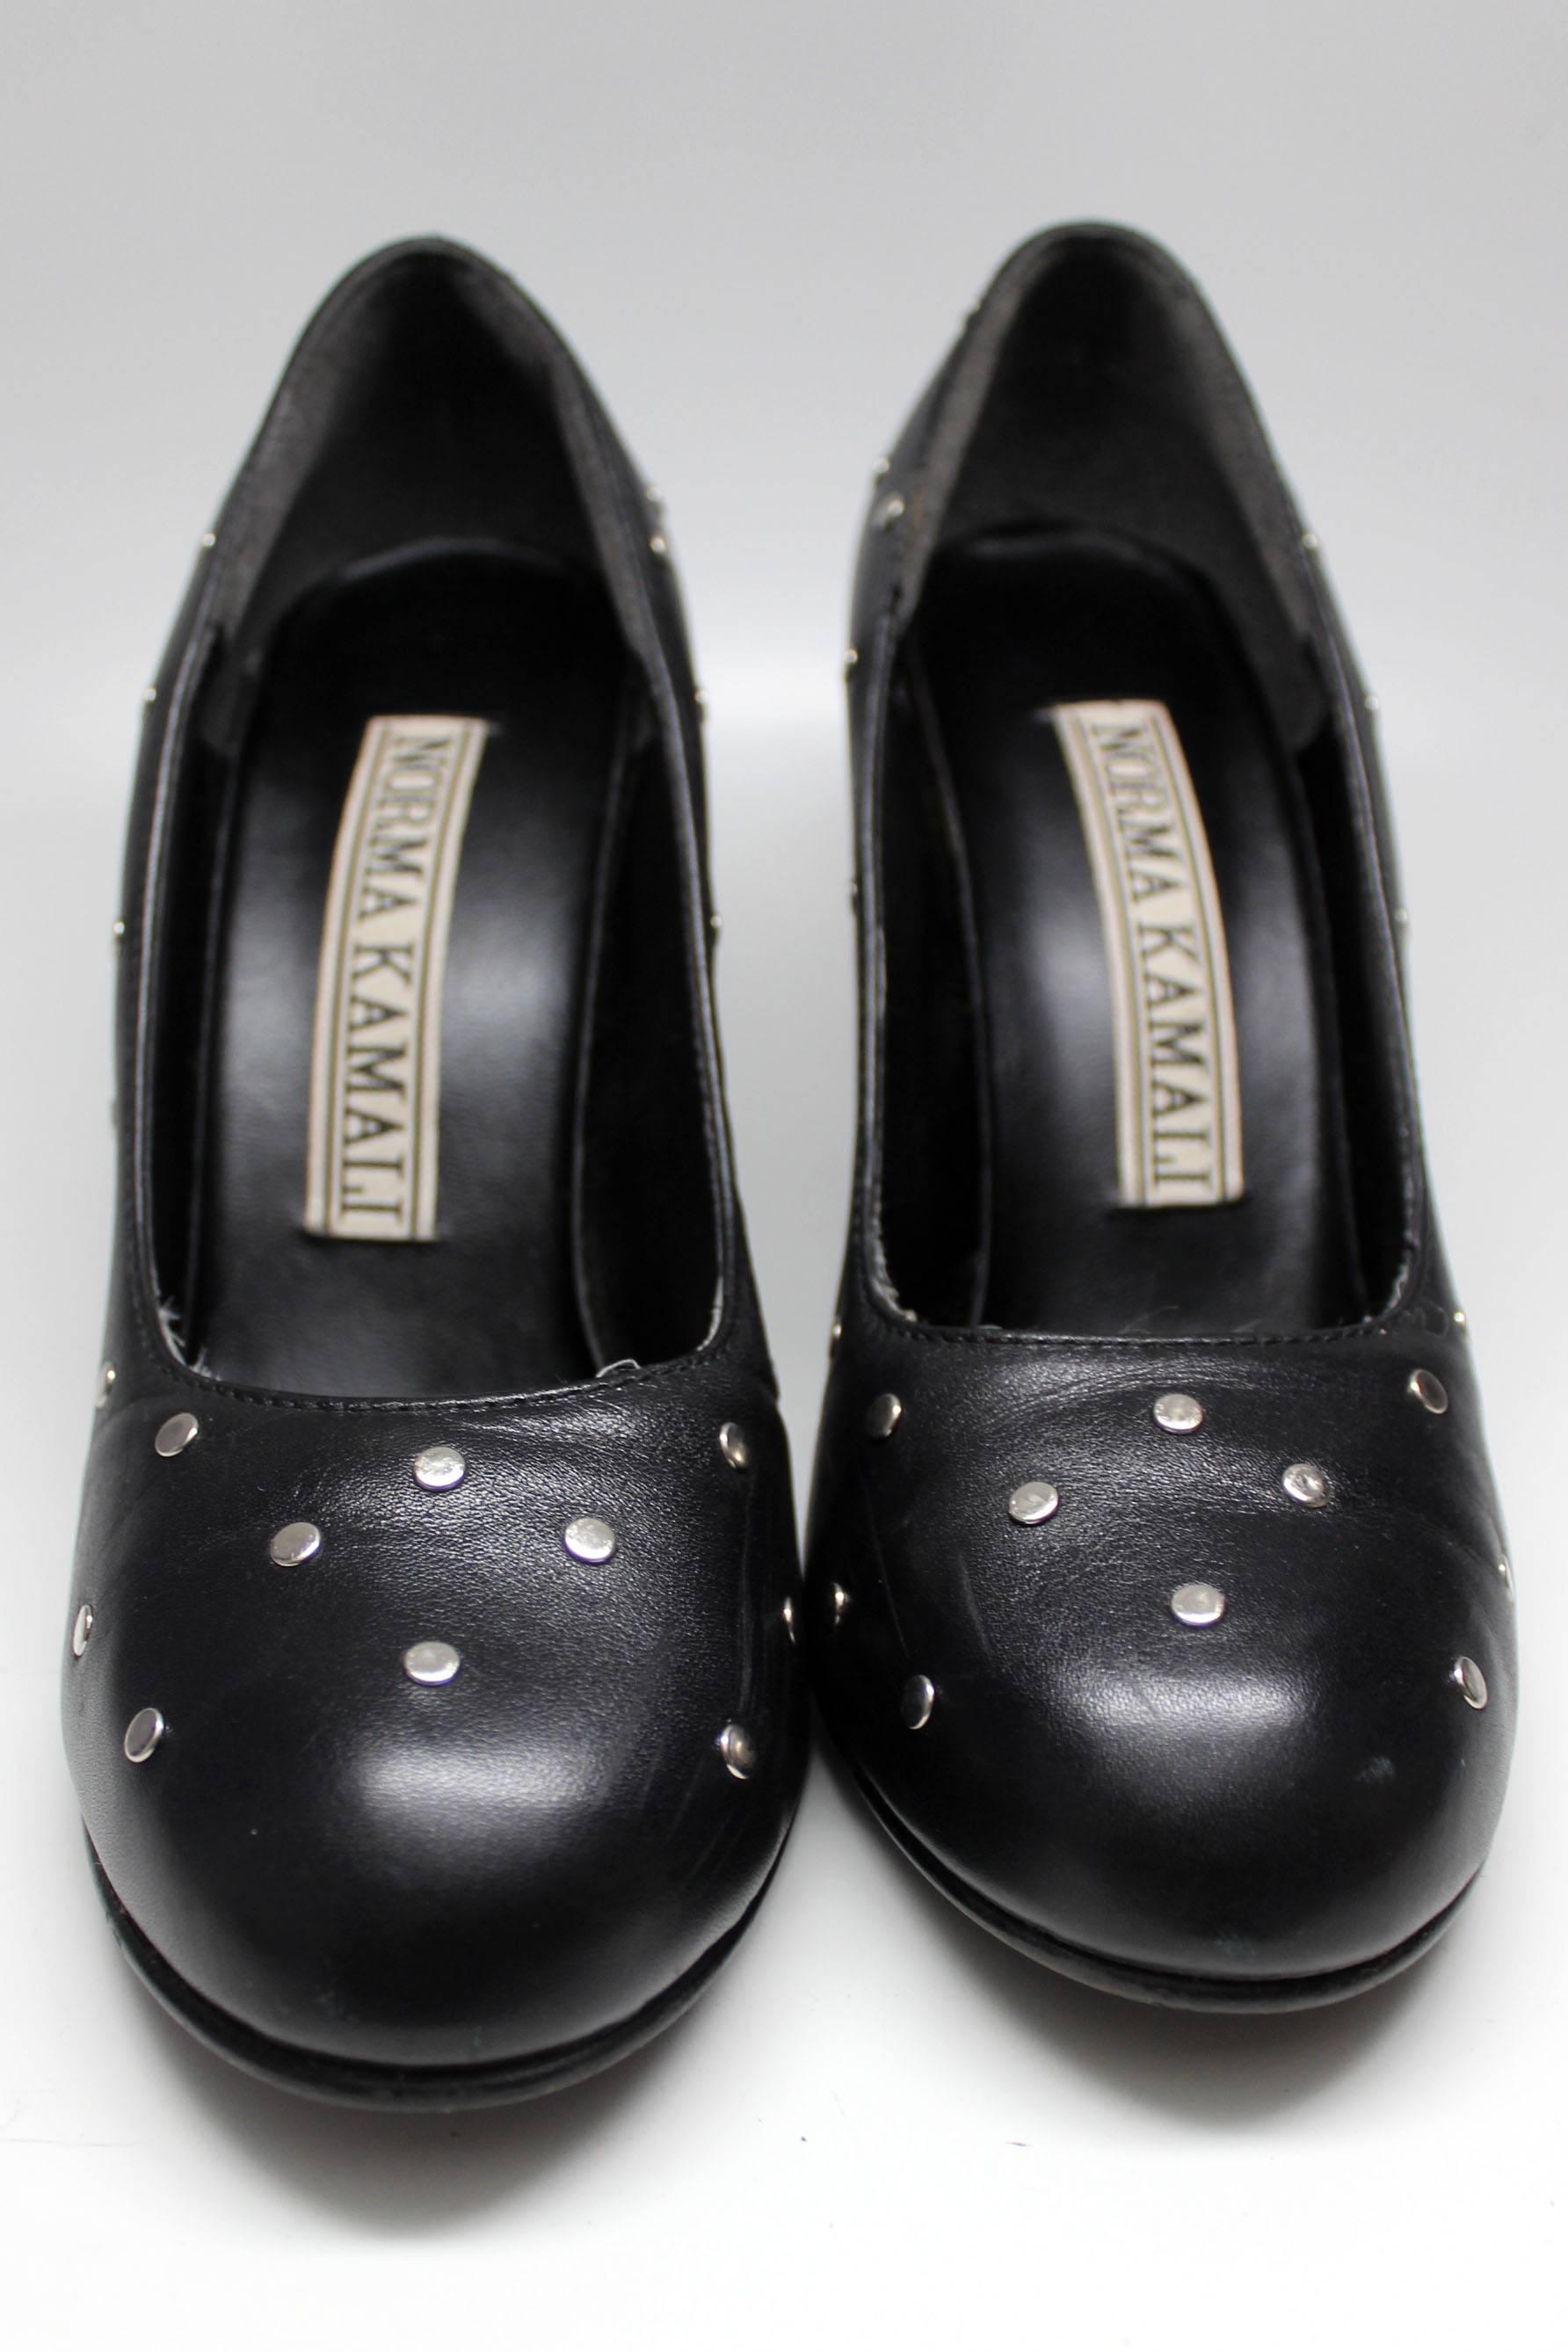 Norma Kamali Studded Leather Heels In Excellent Condition For Sale In New York, NY